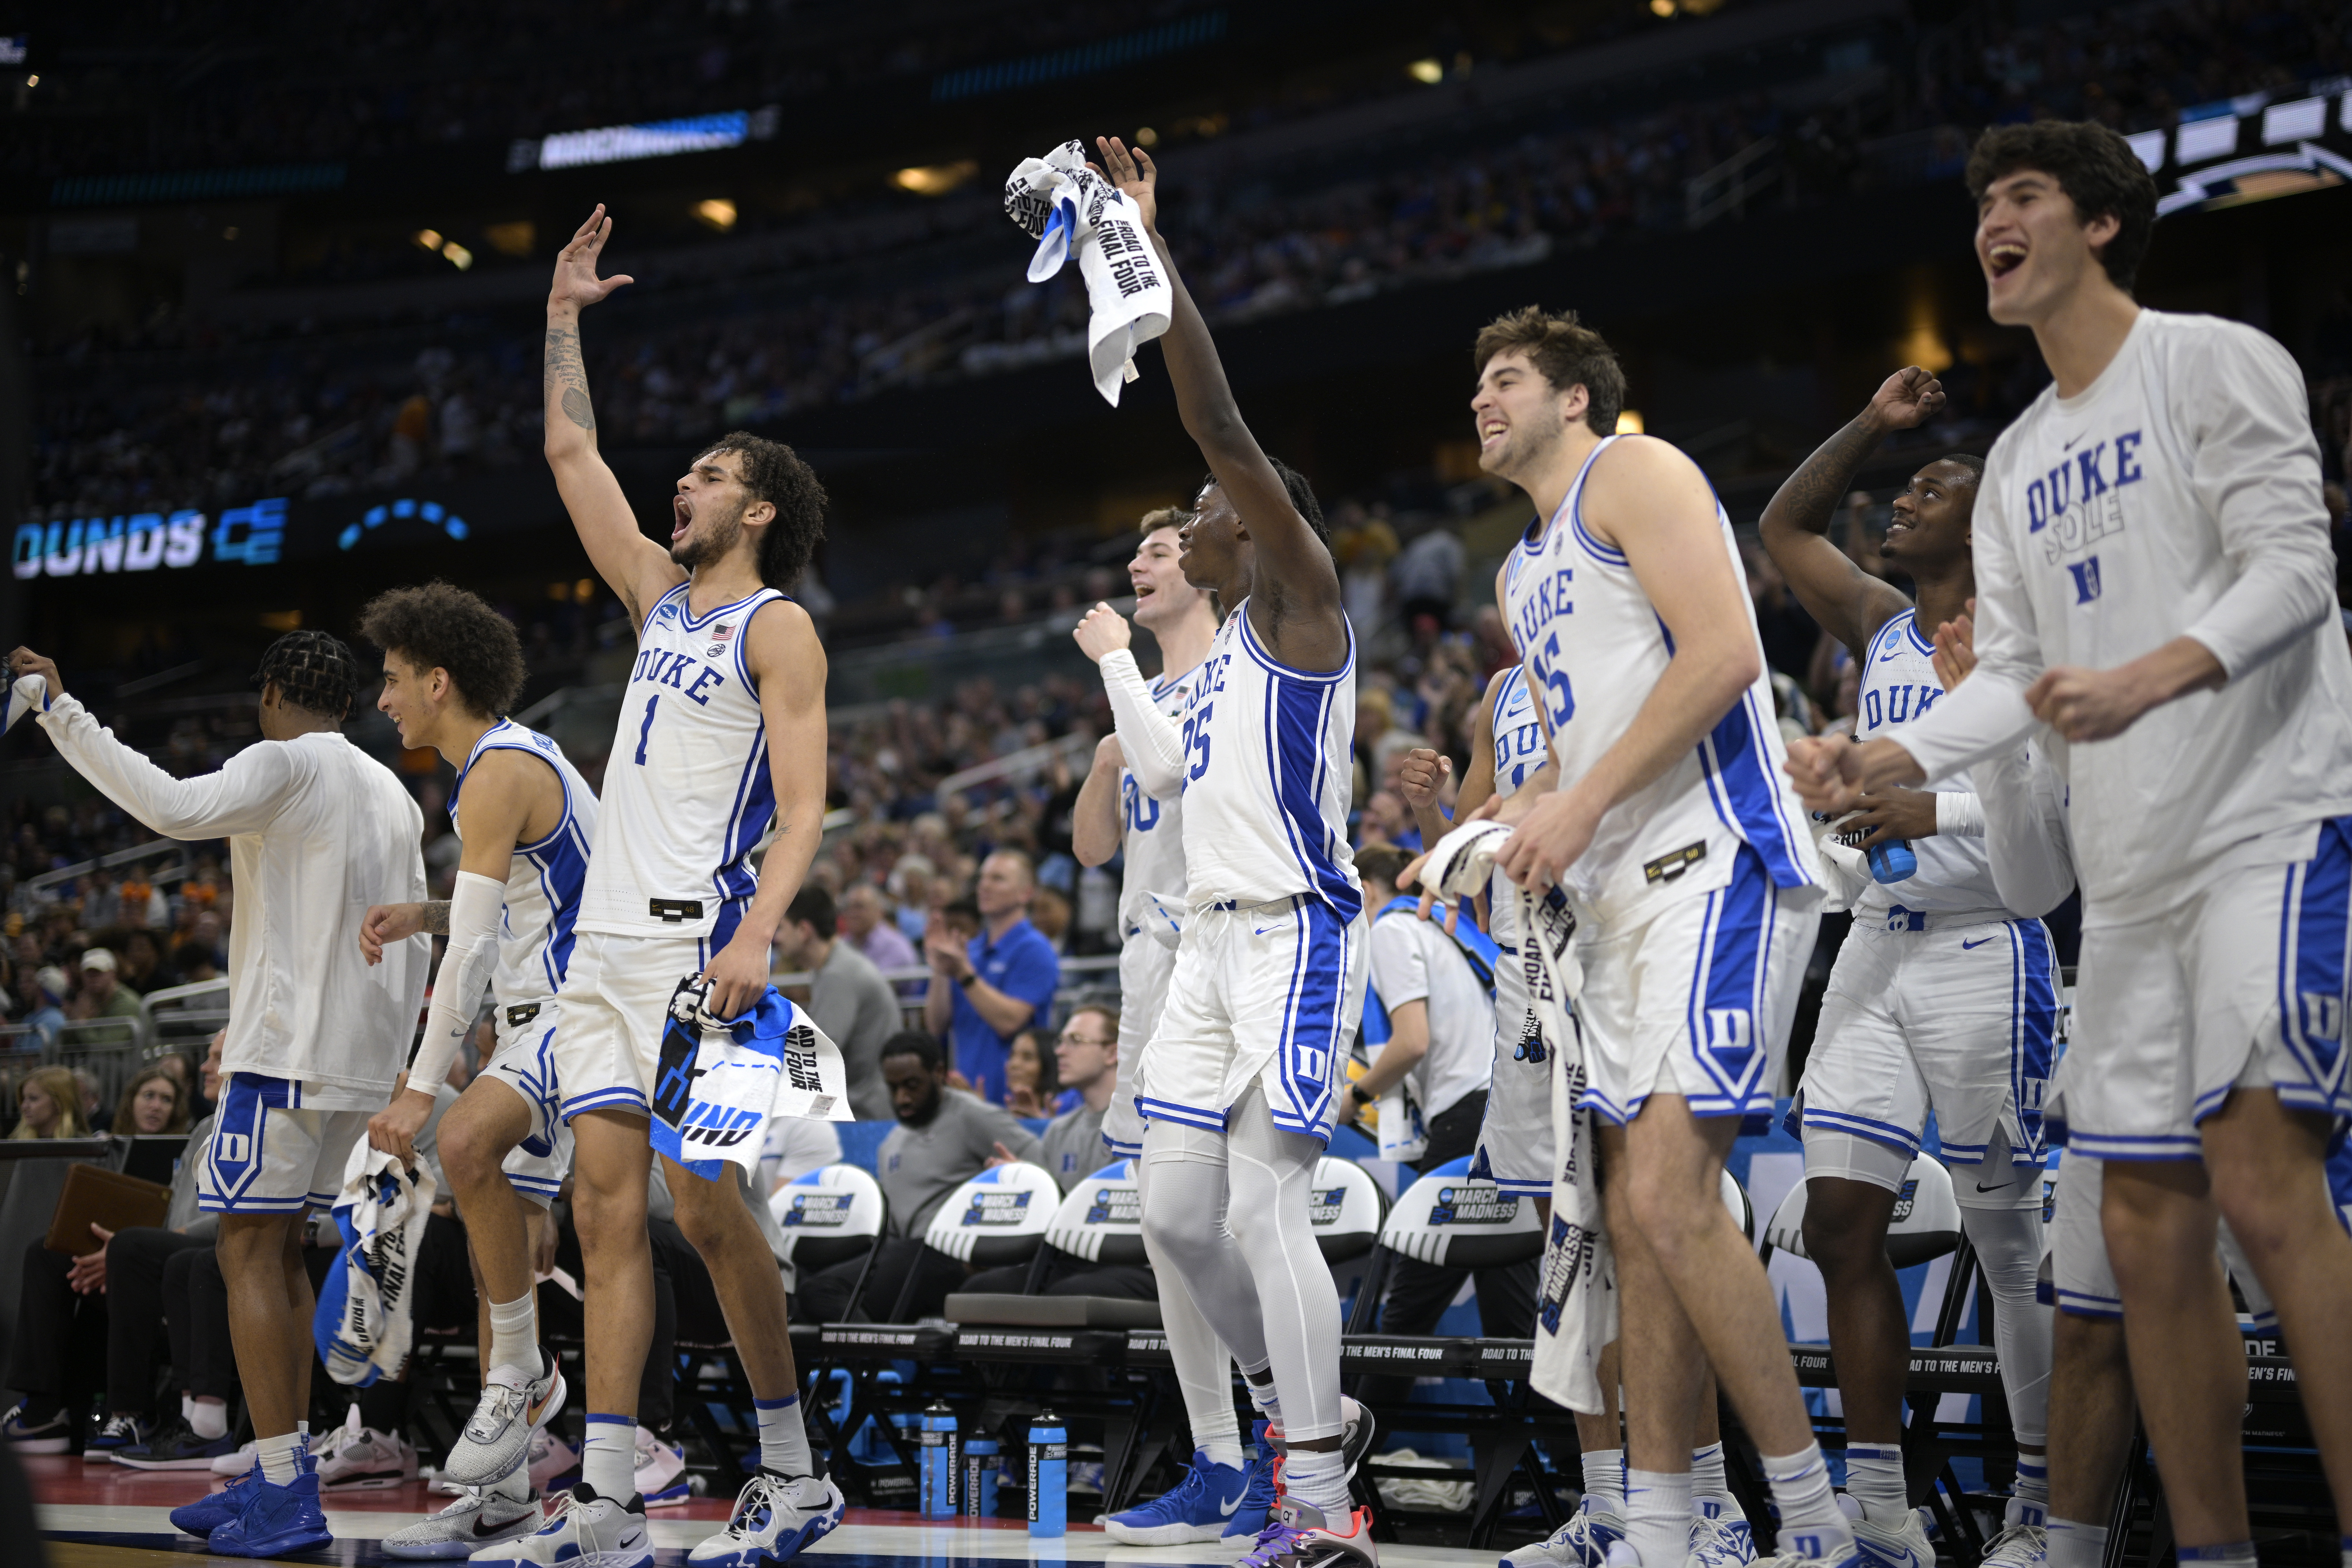 How to Watch the NCAA Mens Basketball Tournament today - March 18 Channel, Stream, Preview